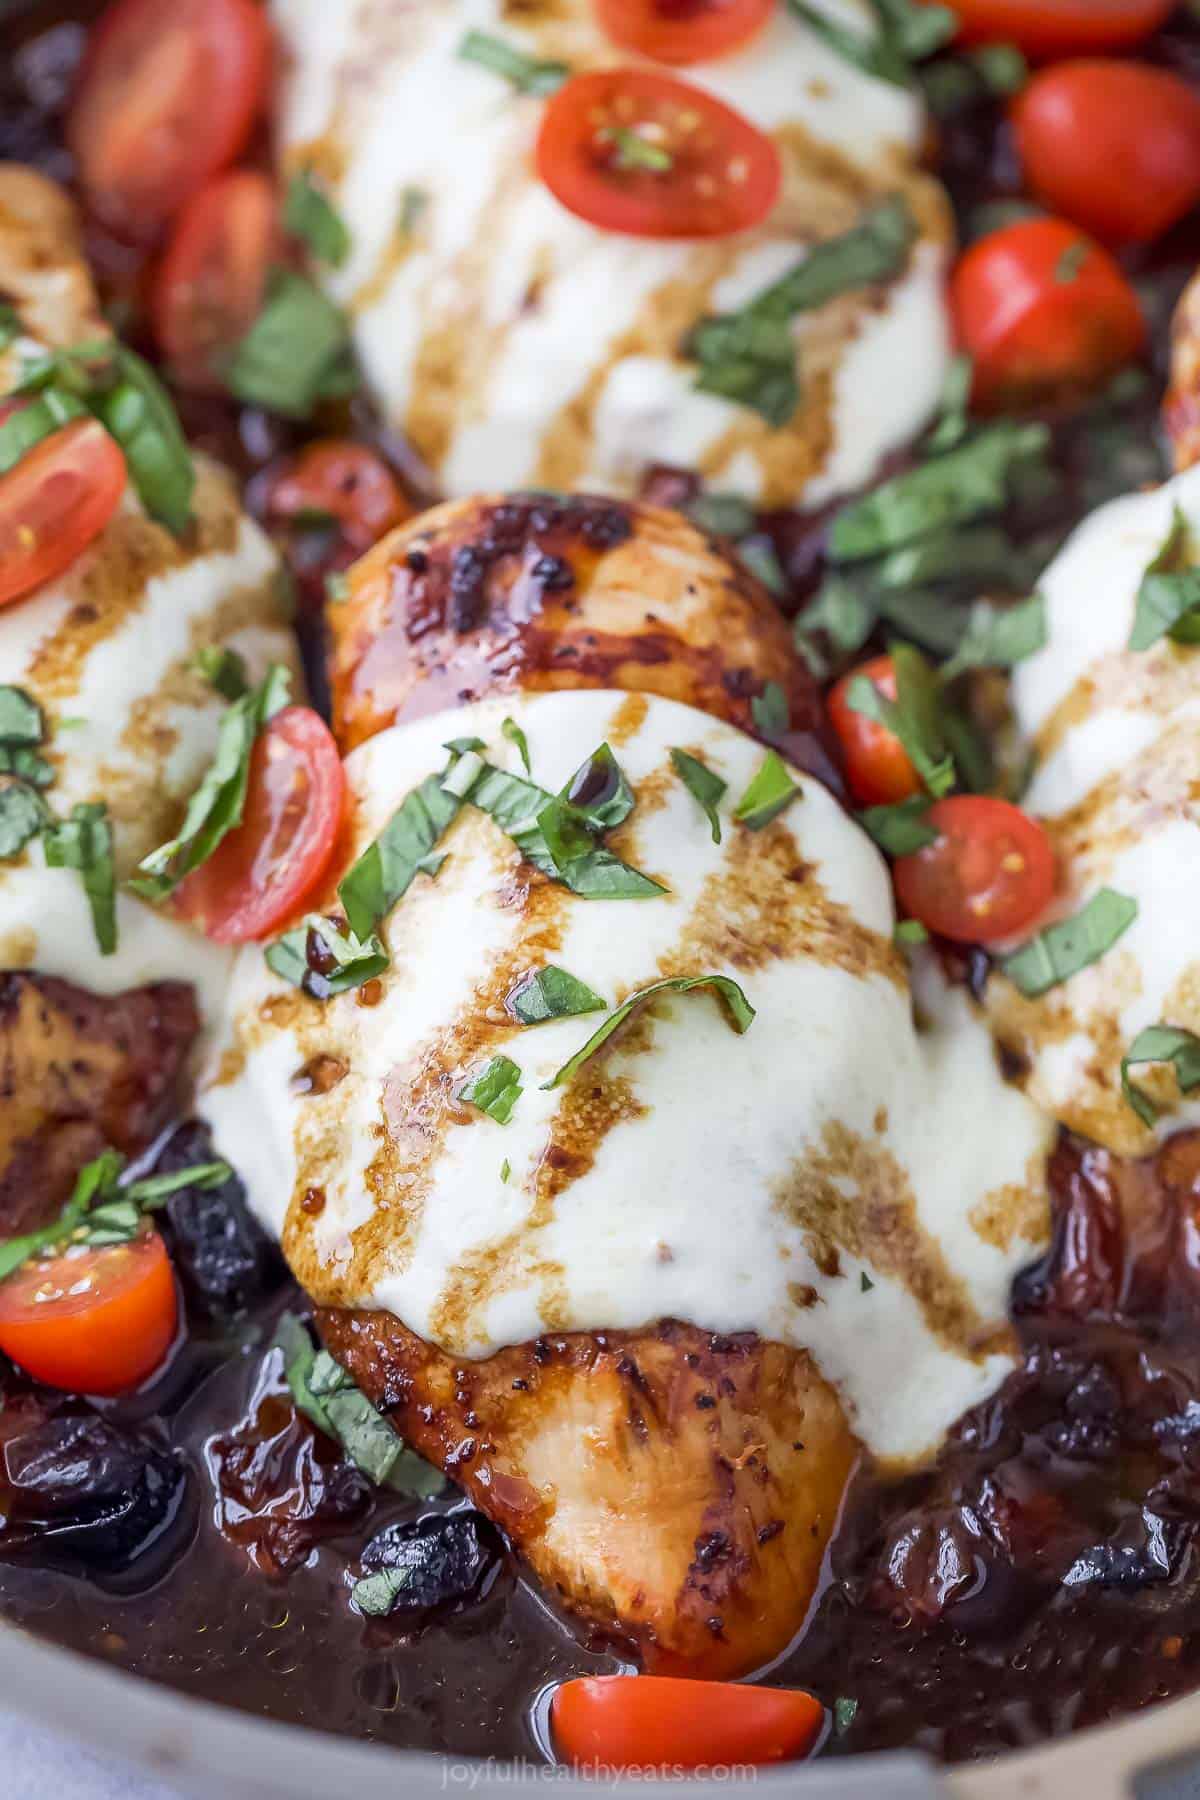 Juicy chicken with cherry tomatoes, mozzarella, and basil.